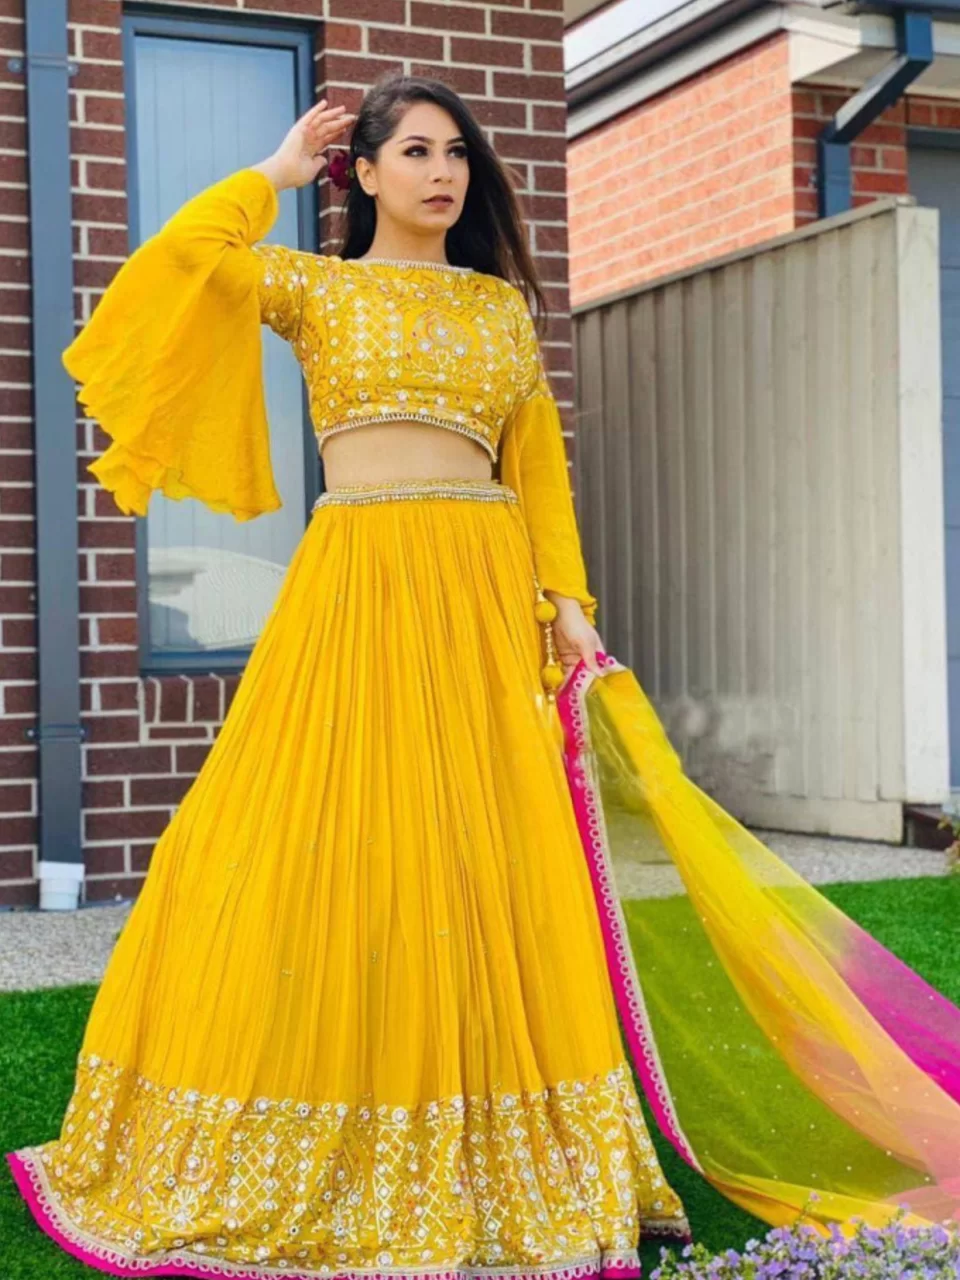 Marvelous Heavy Wedding Wear Mother Daughter Style Lehenga Choli Combo |  Rent dresses, Mother daughter fashion, Gorgeous clothes